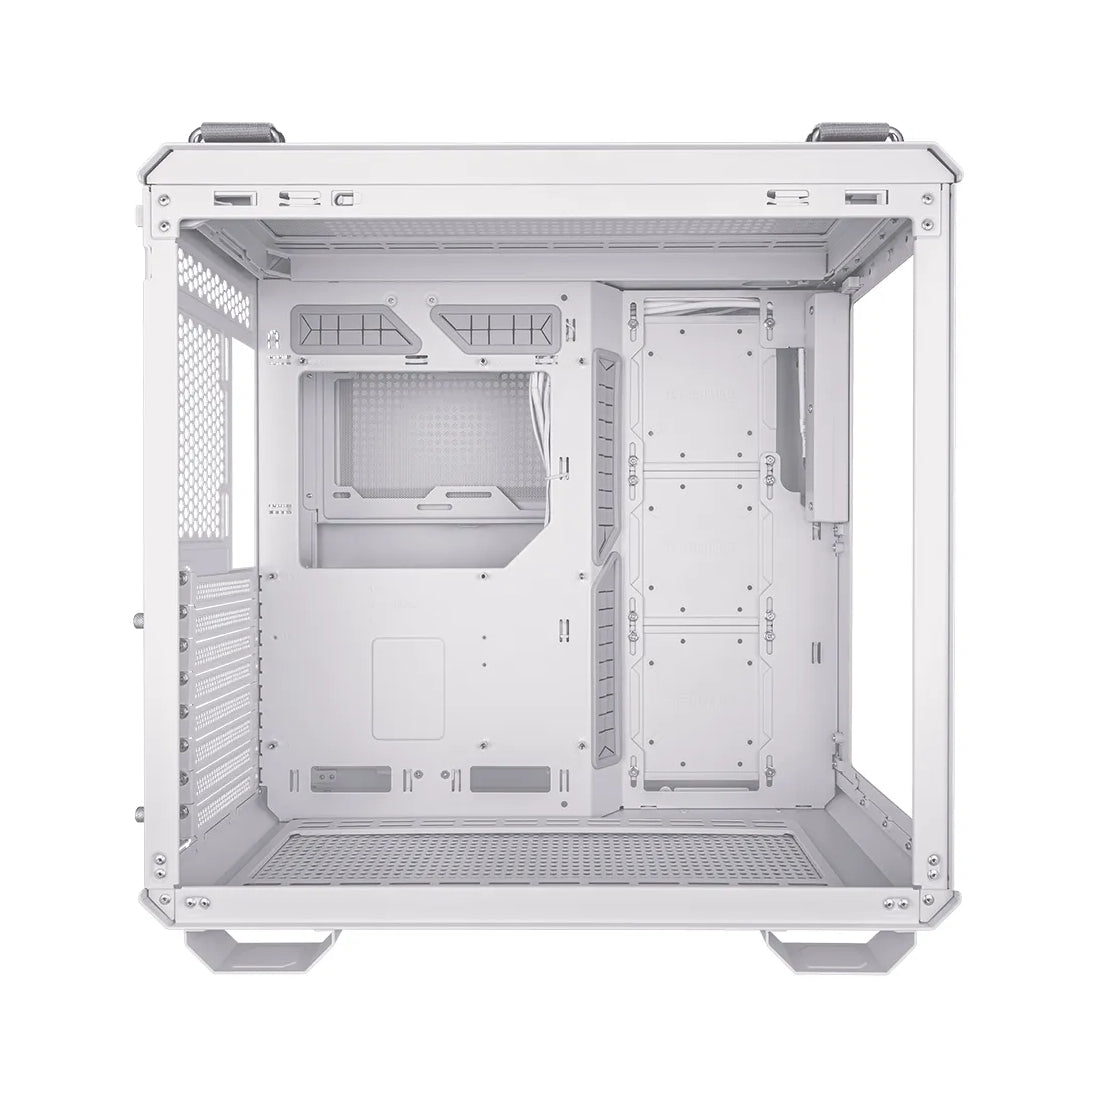 Asus TUF Gaming GT502 ATX Mid Tower Case - White - صندوق - Store 974 | ستور ٩٧٤